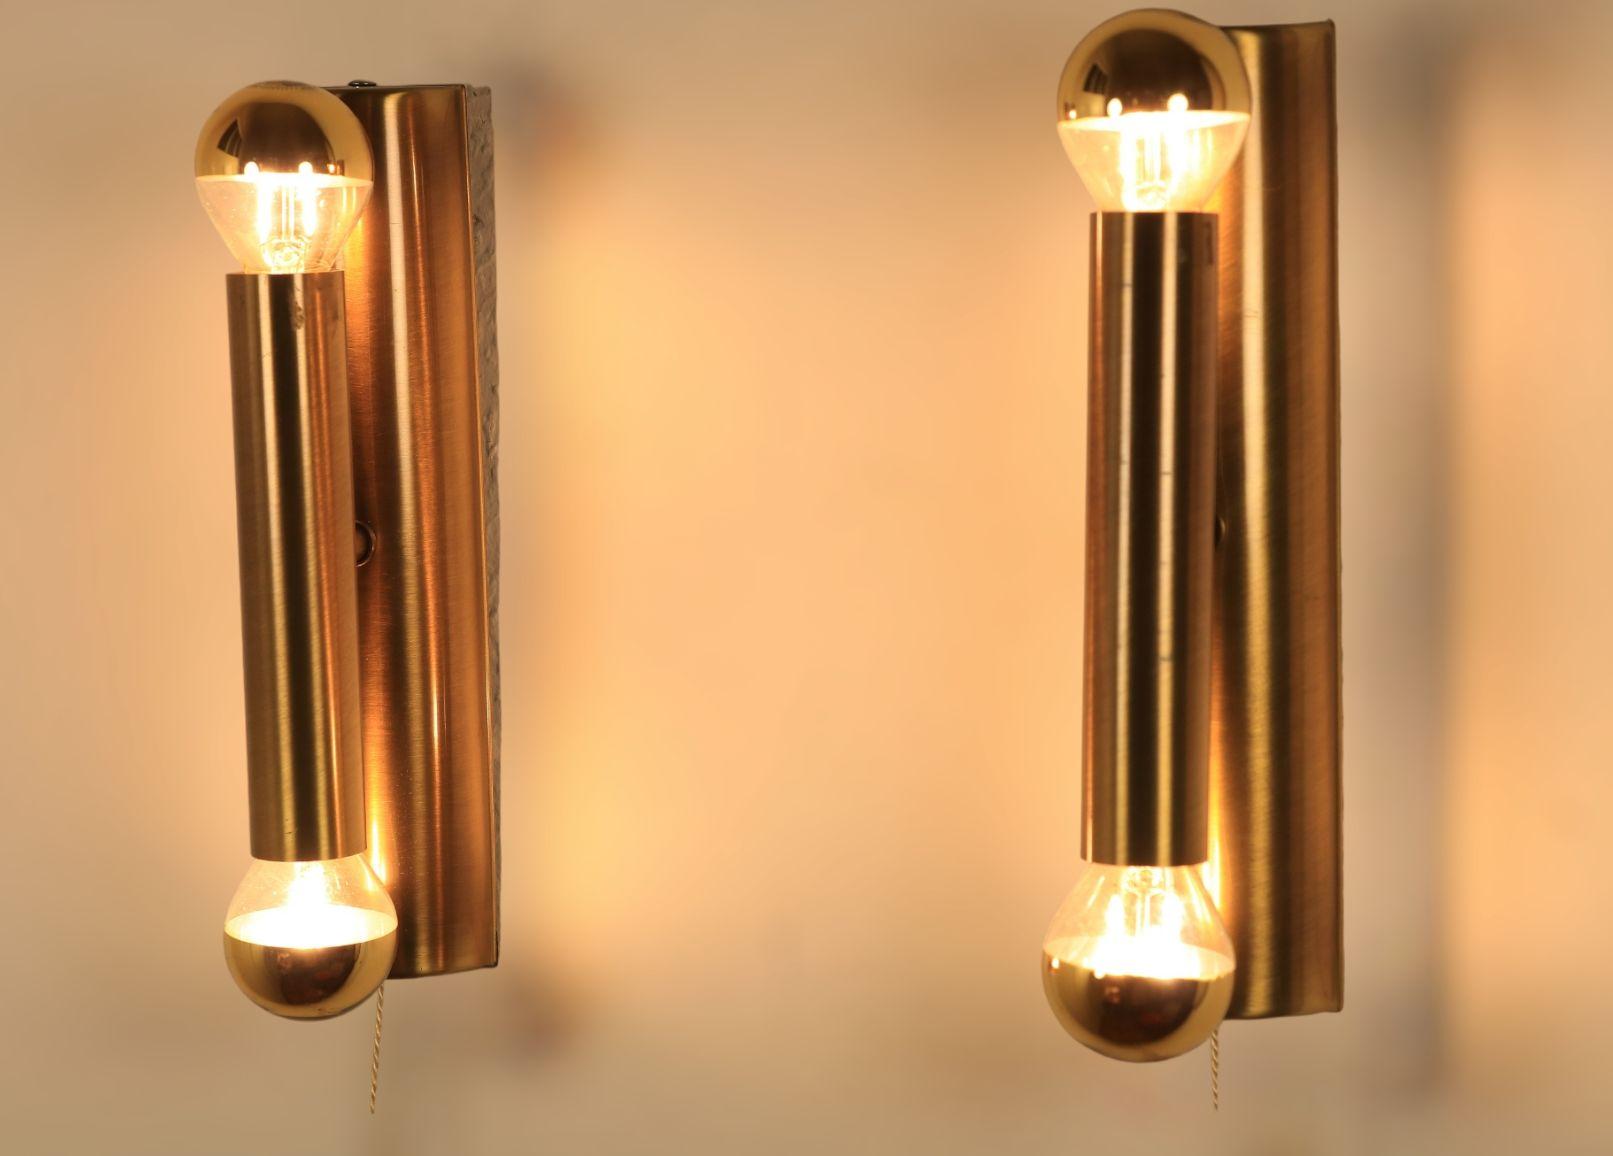 Set of Minimalistic Brass Wall Lights, 1980s For Sale 2